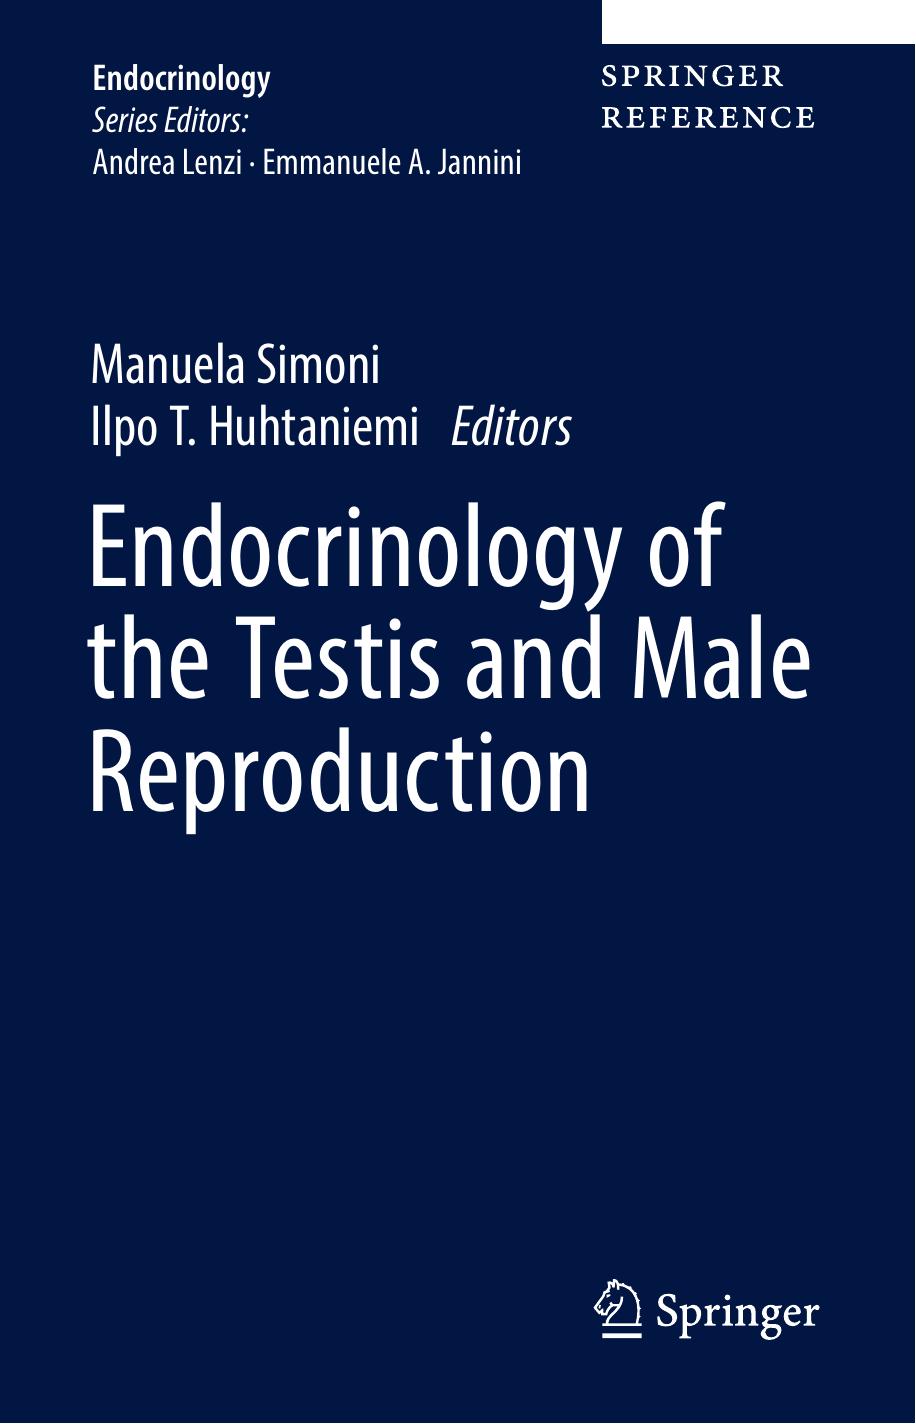 Endocrinology of the Testis and Male Reproduction 2017